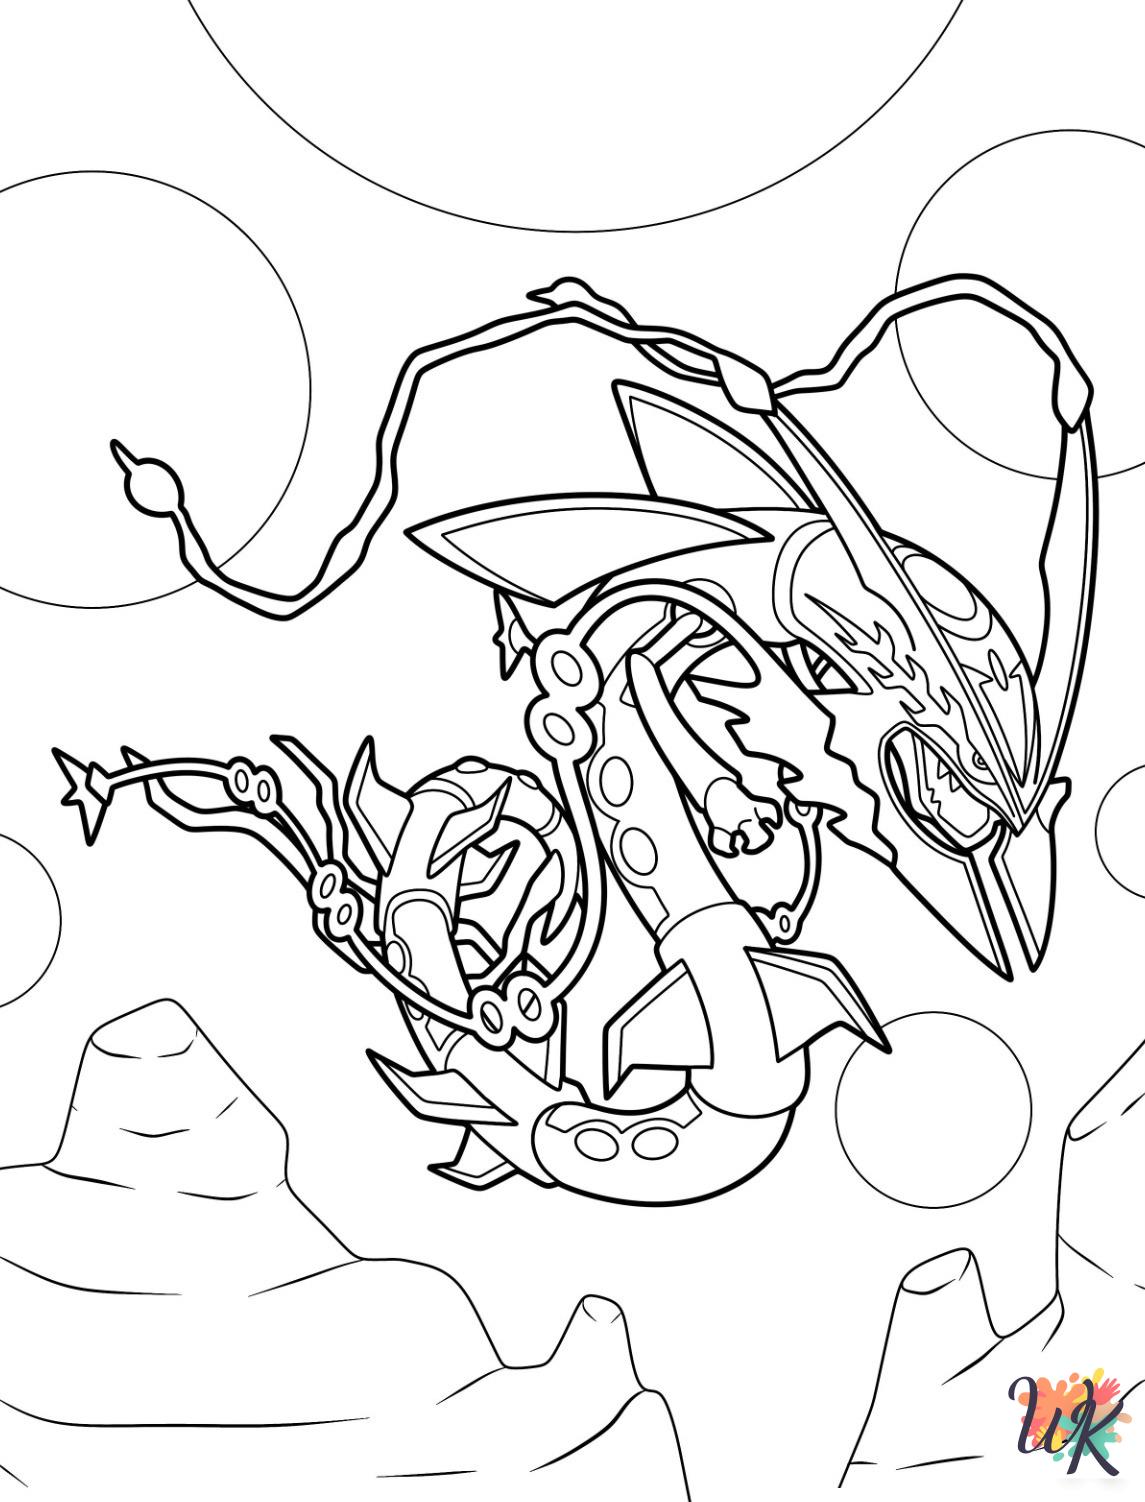 Legendary Pokemon ornament coloring pages